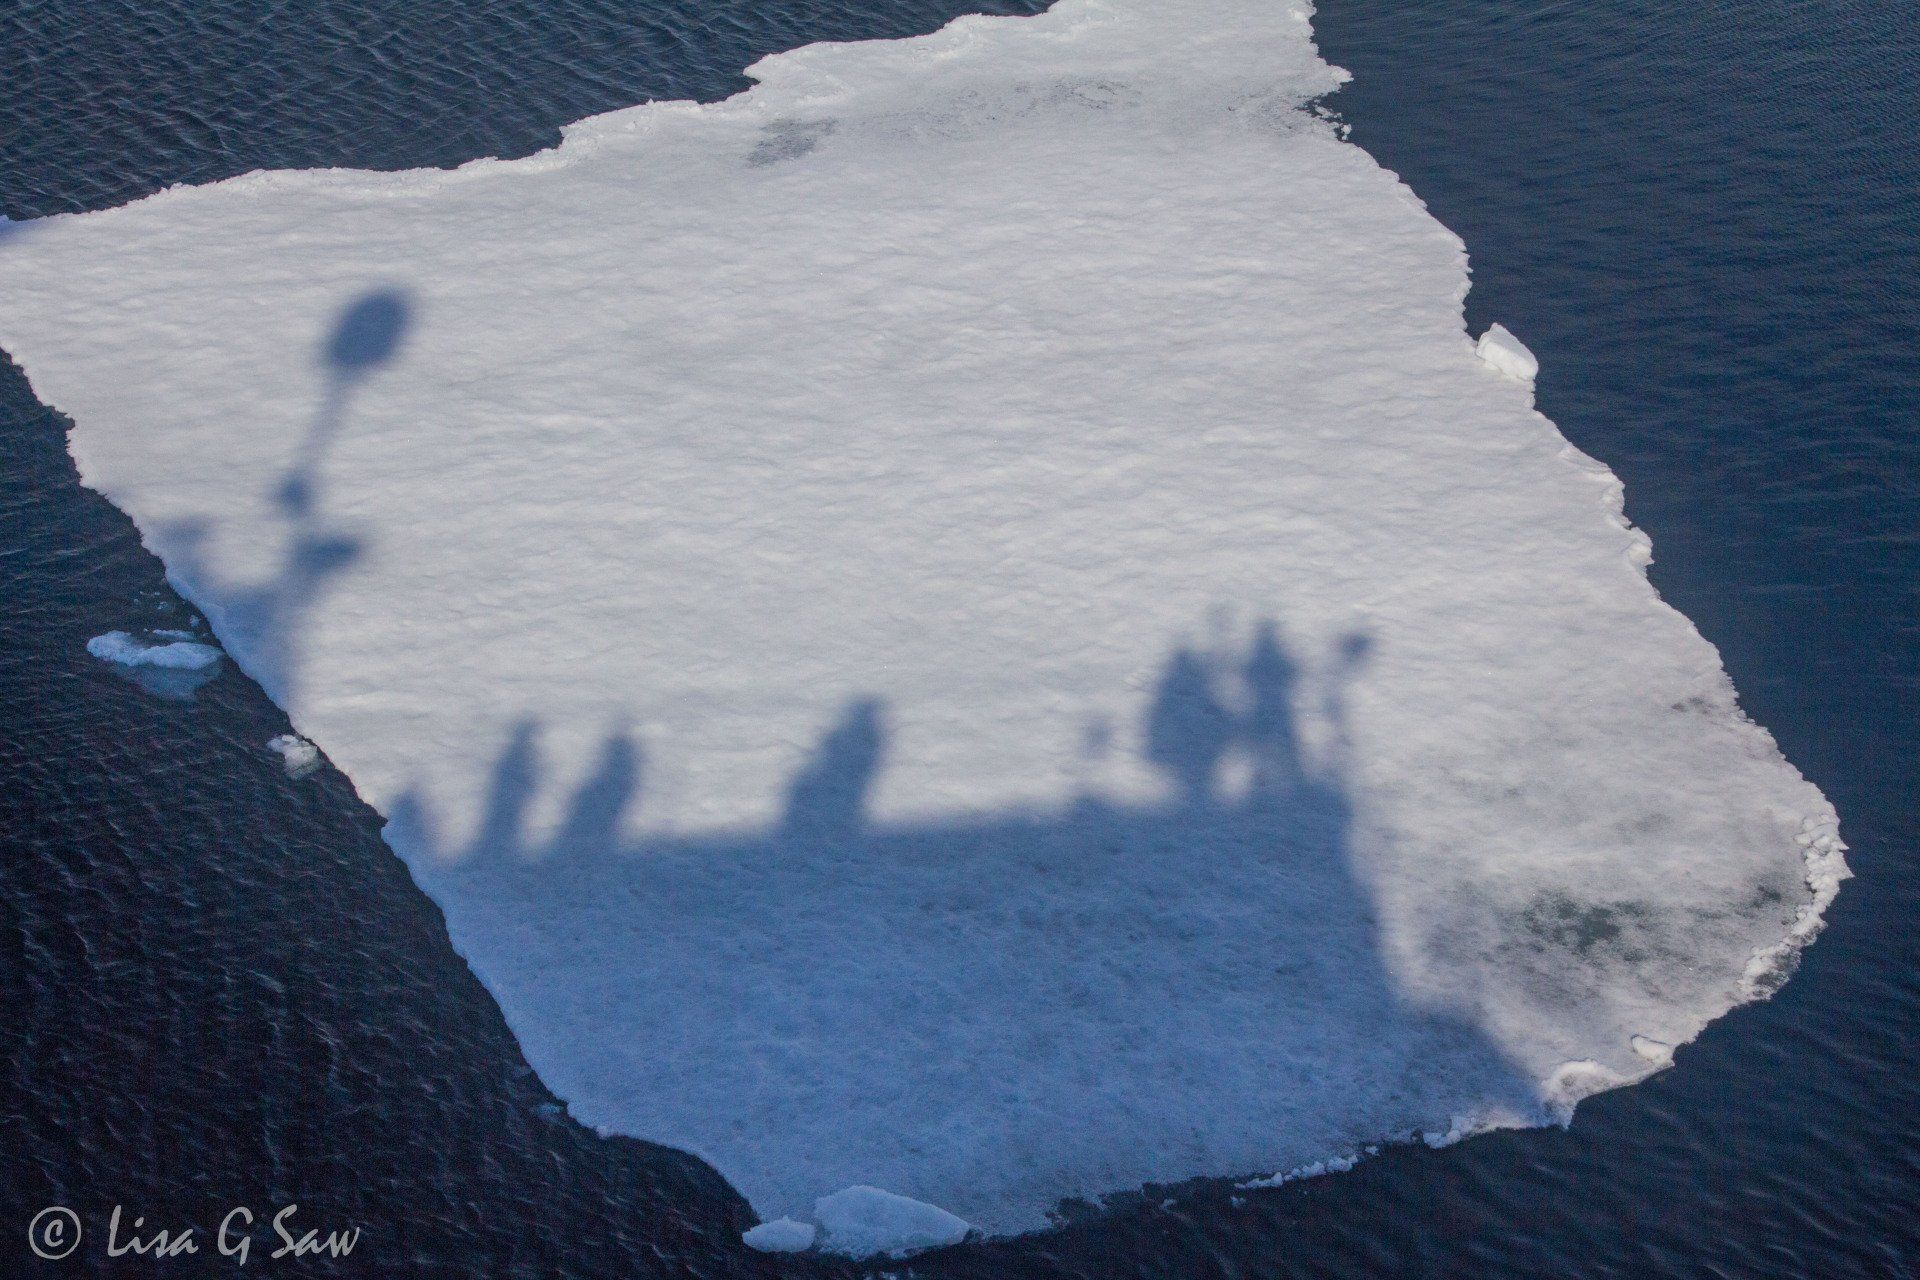 Shadow of ship and people in the Arctic sea ice